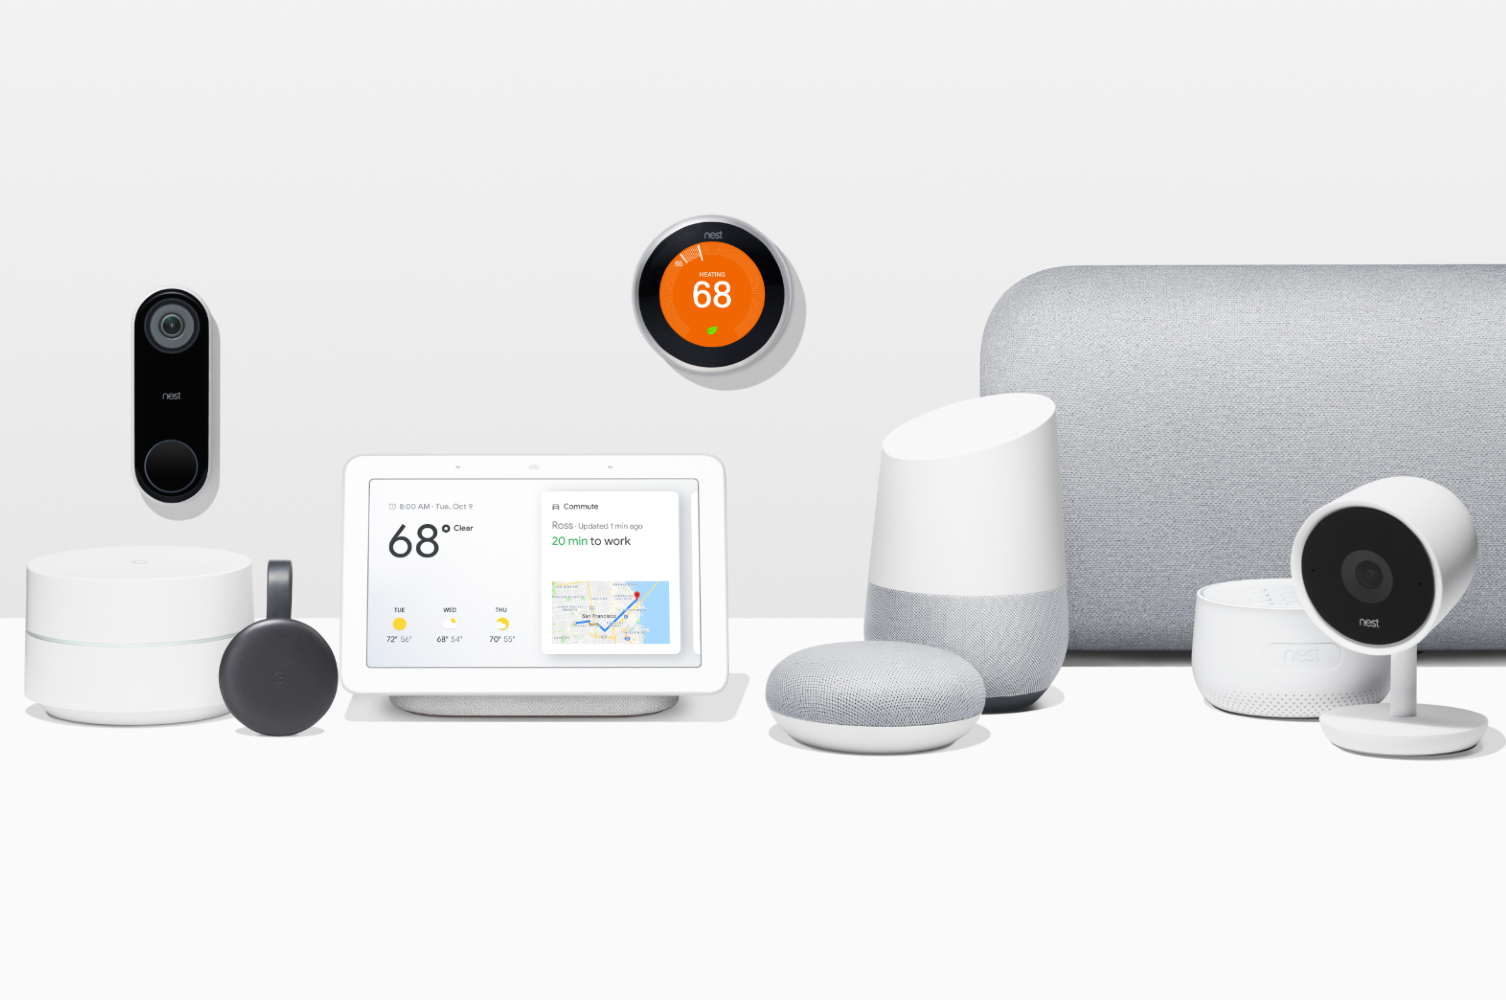 Google's range of wireless networking products.